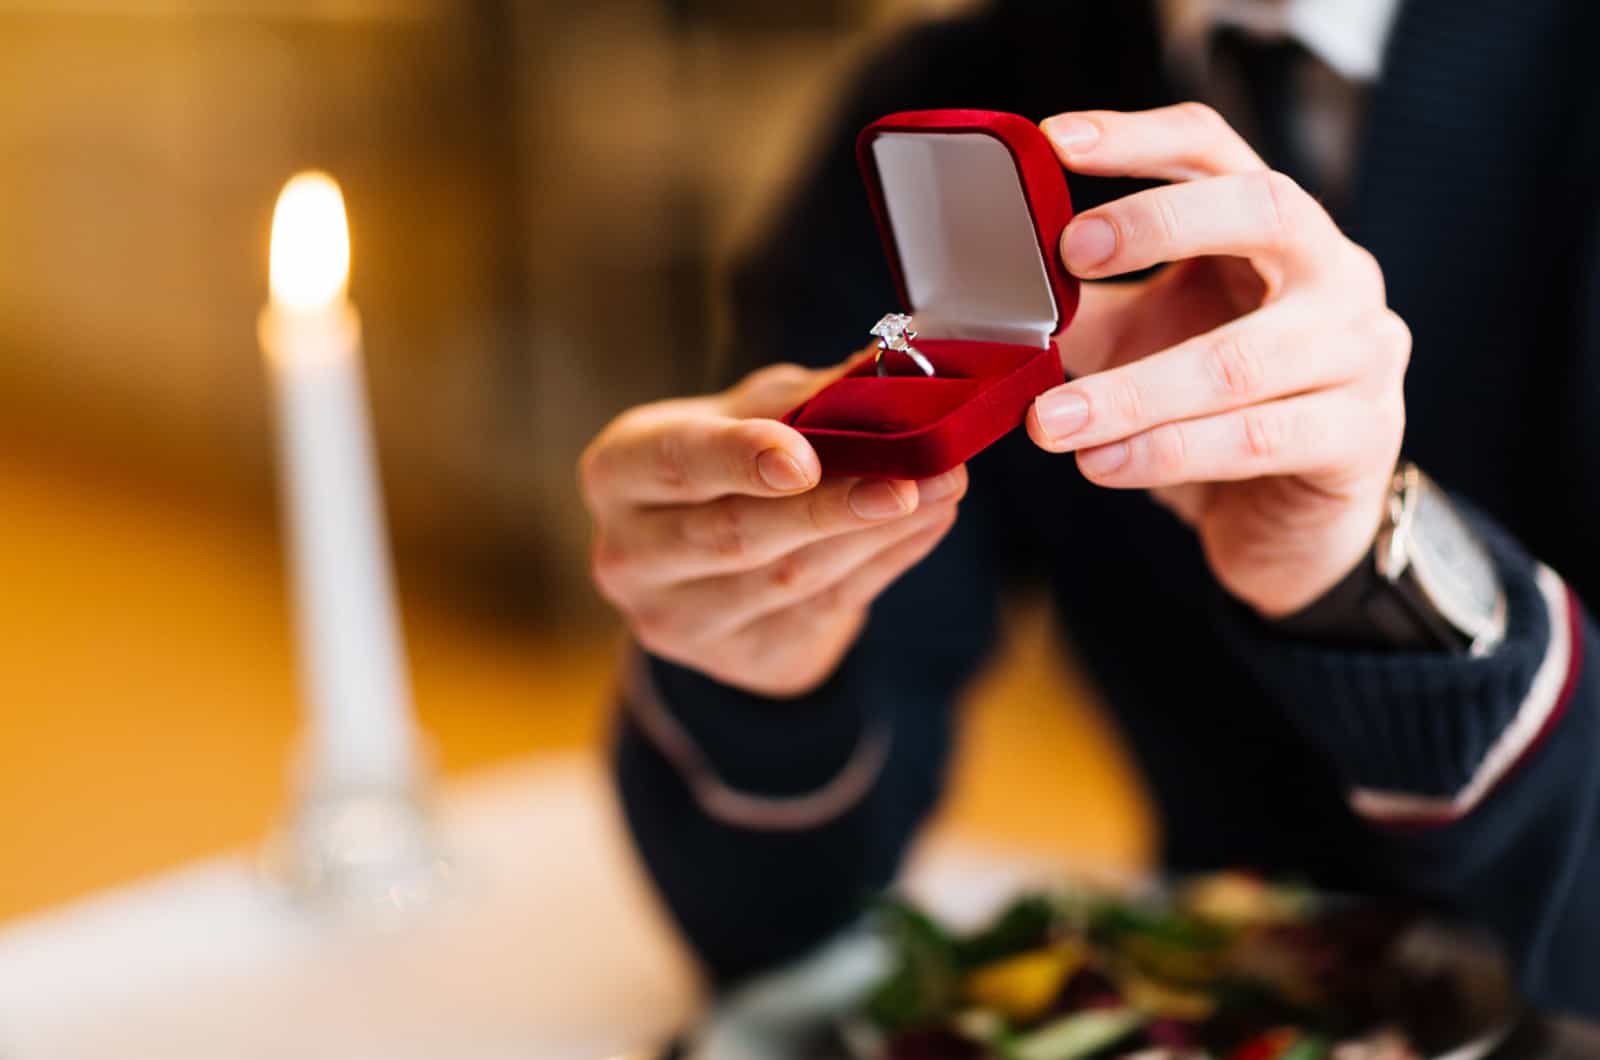 15 Signs He Bought An Engagement Ring: Get Ready To Say Yes